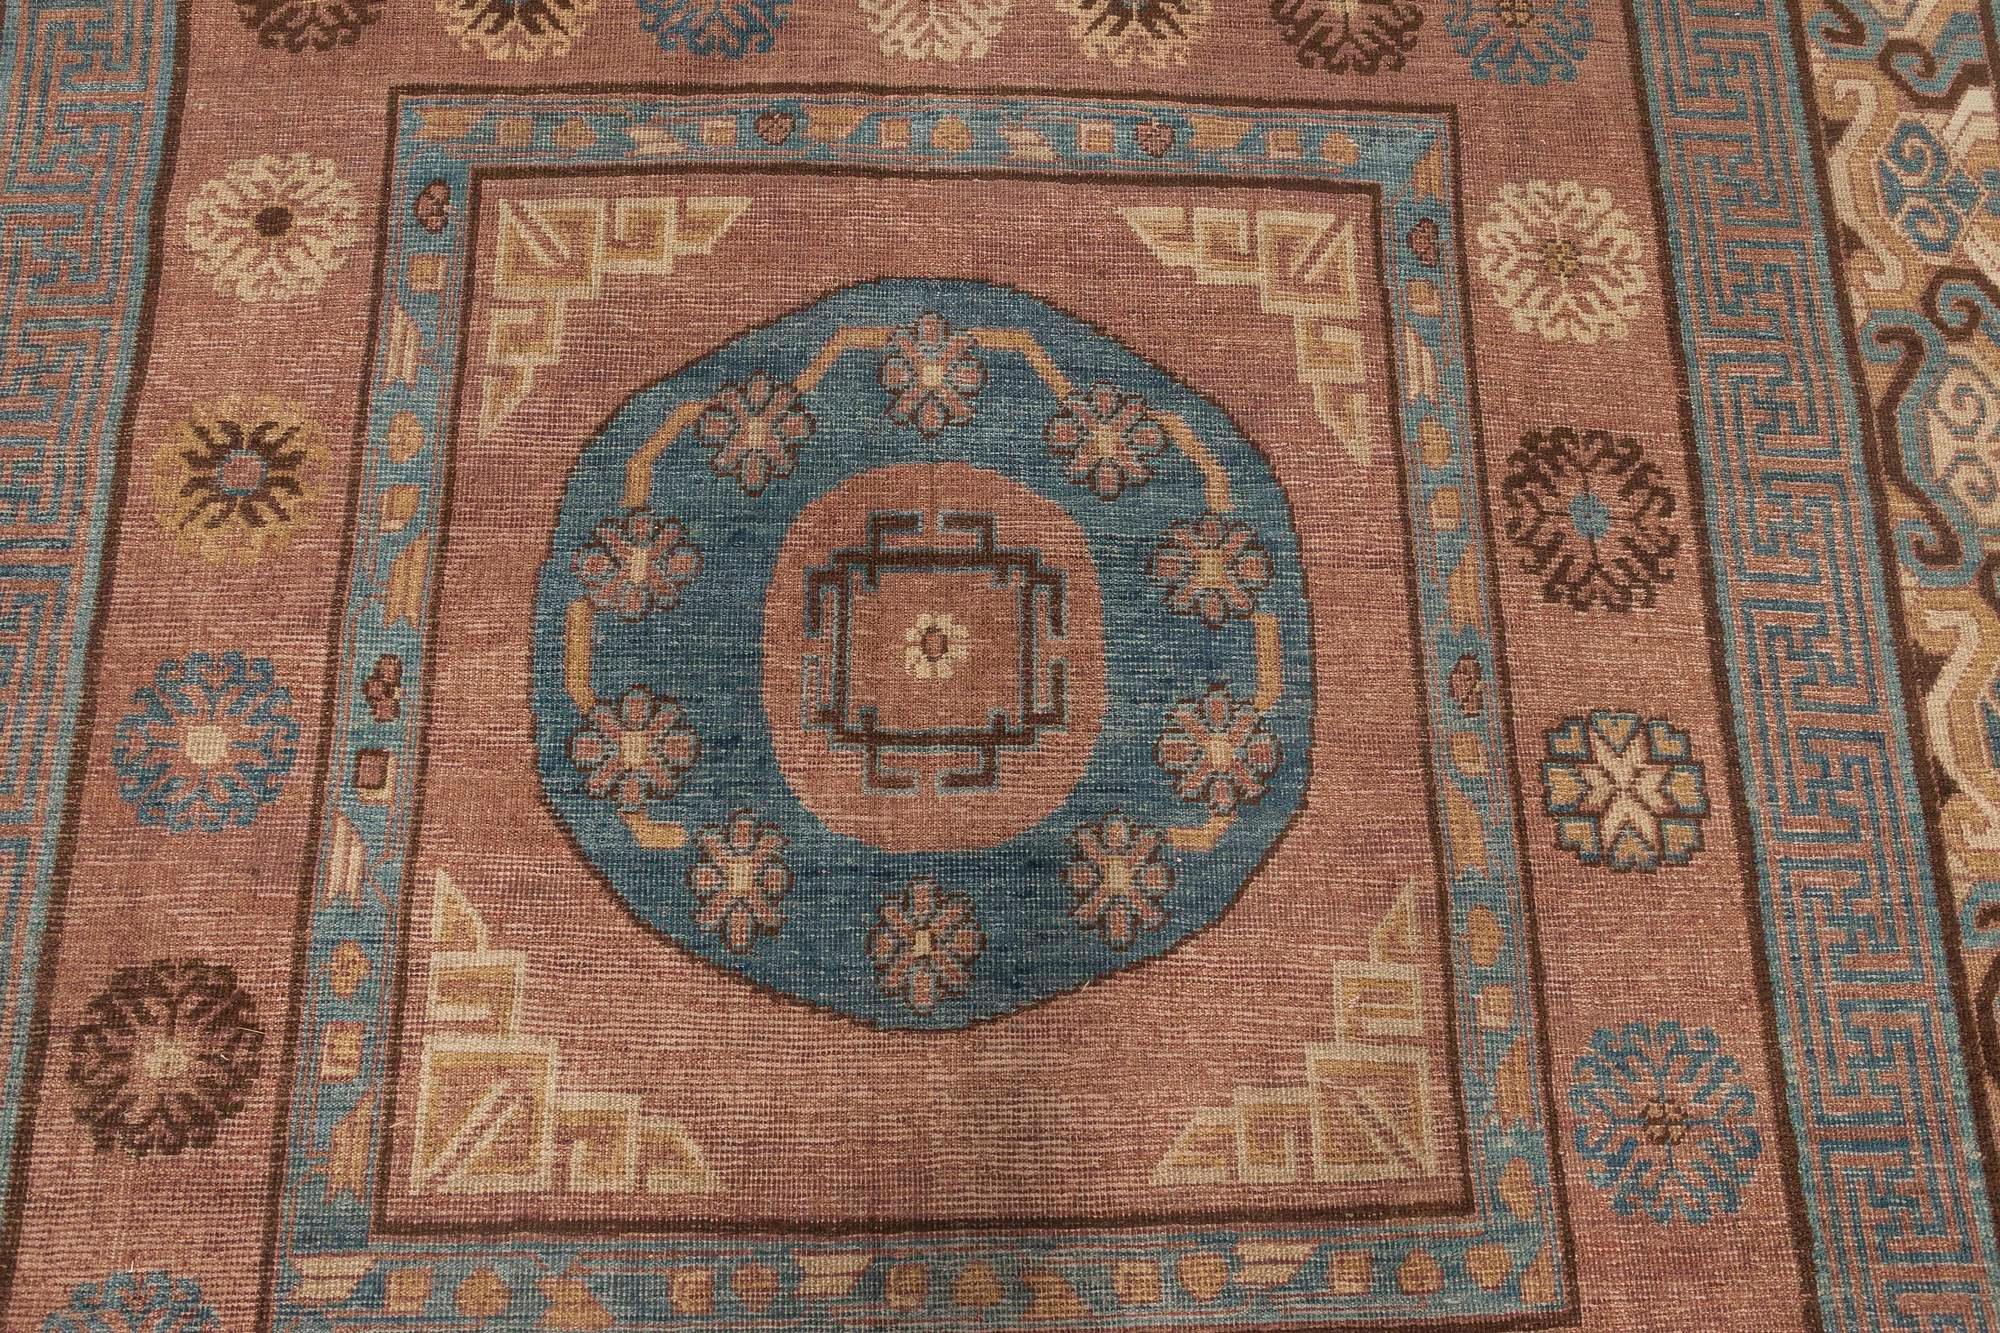 Mid-20th century geometric brown, blue Samarkand hand knotted wool rug
Size: 6'9